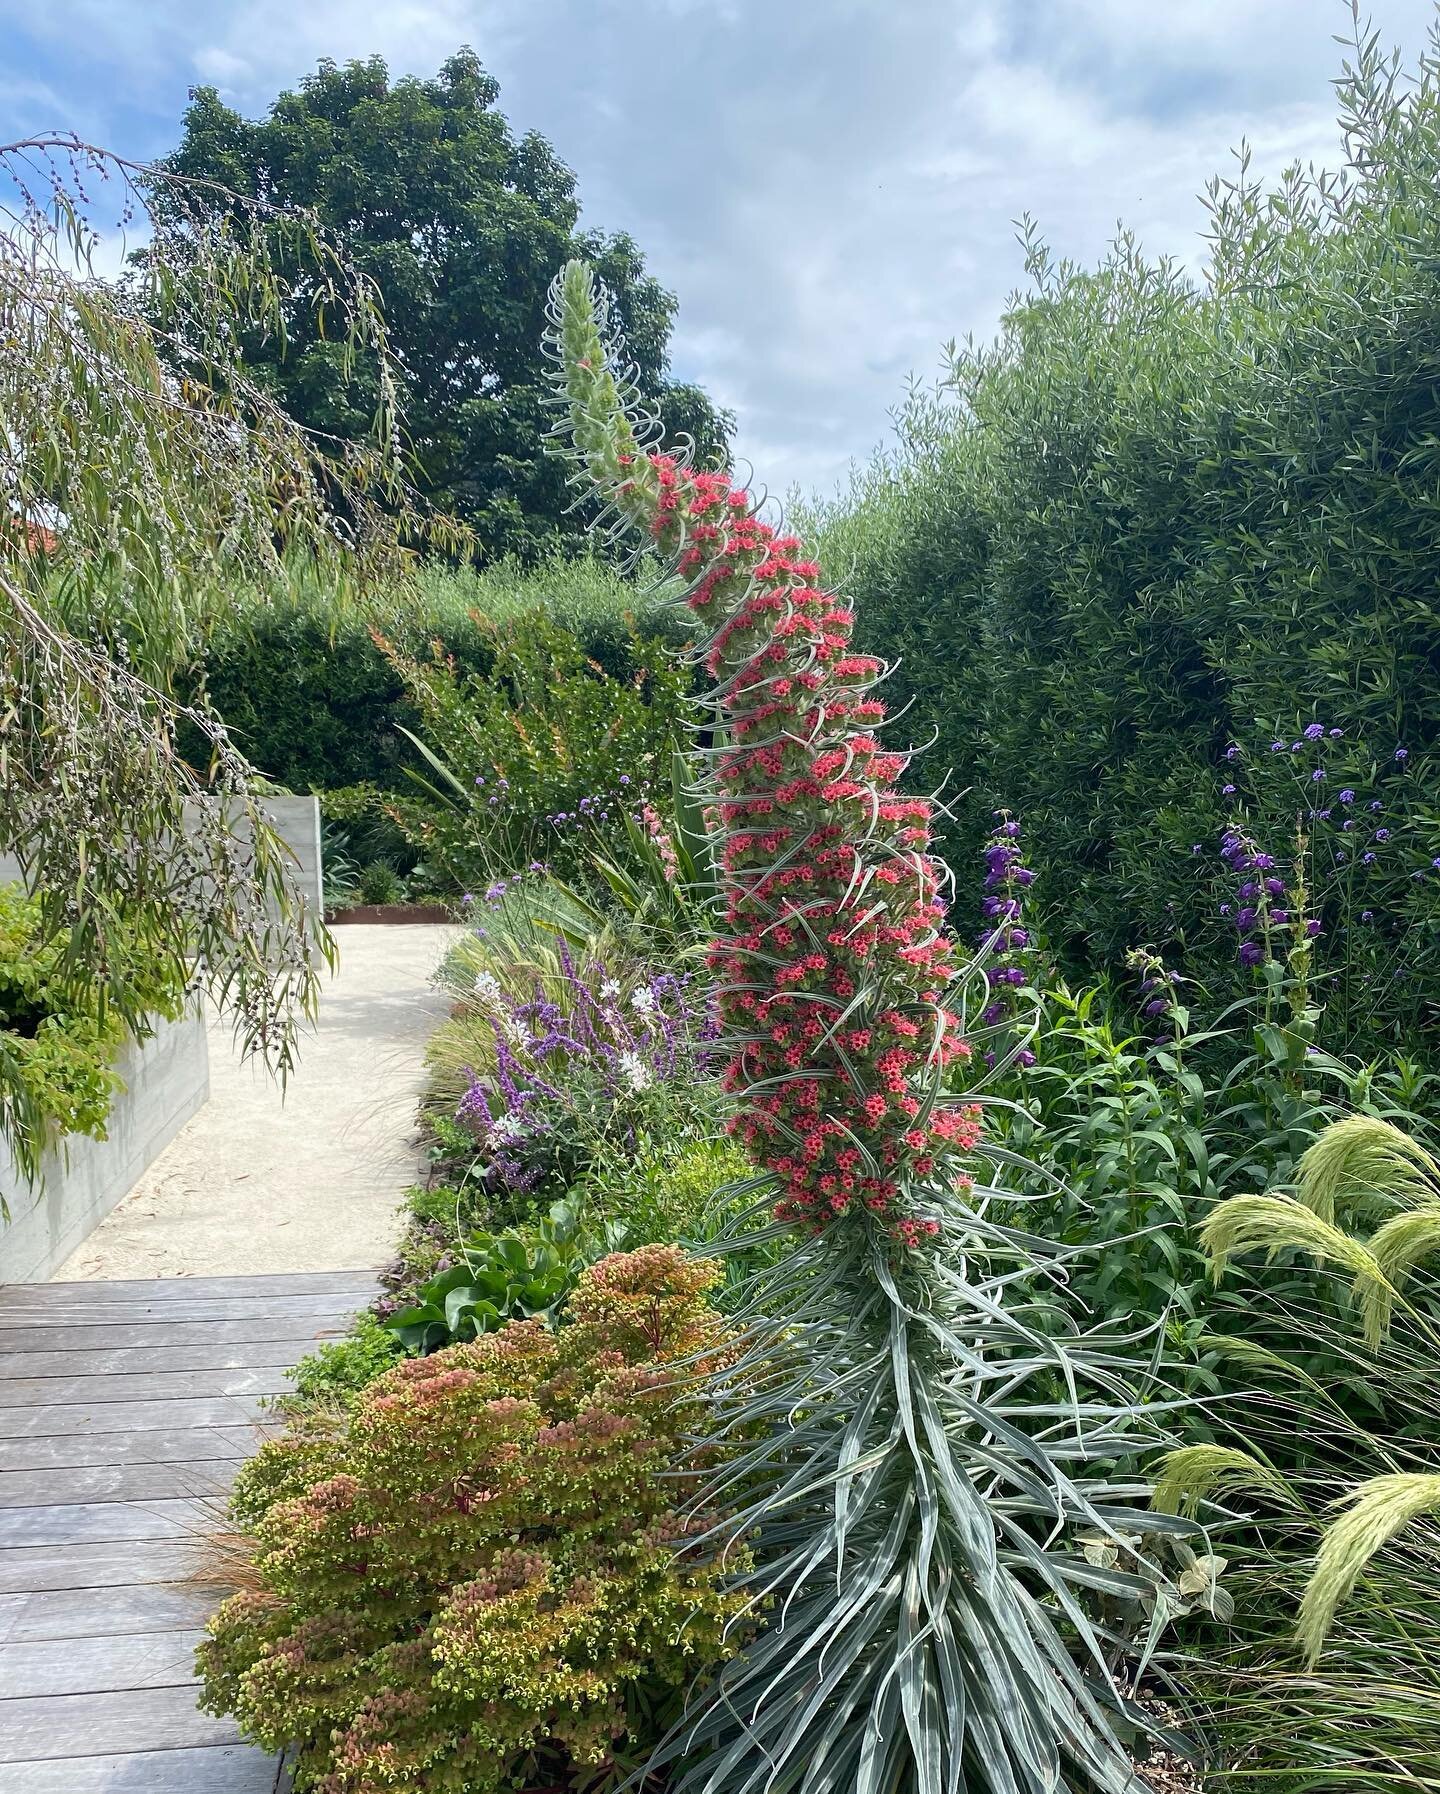 Echium wildpretii 
Pretty spectacular despite the kink at the top. I think the soil was too soft which is why it fell over. Still worth the two year wait!